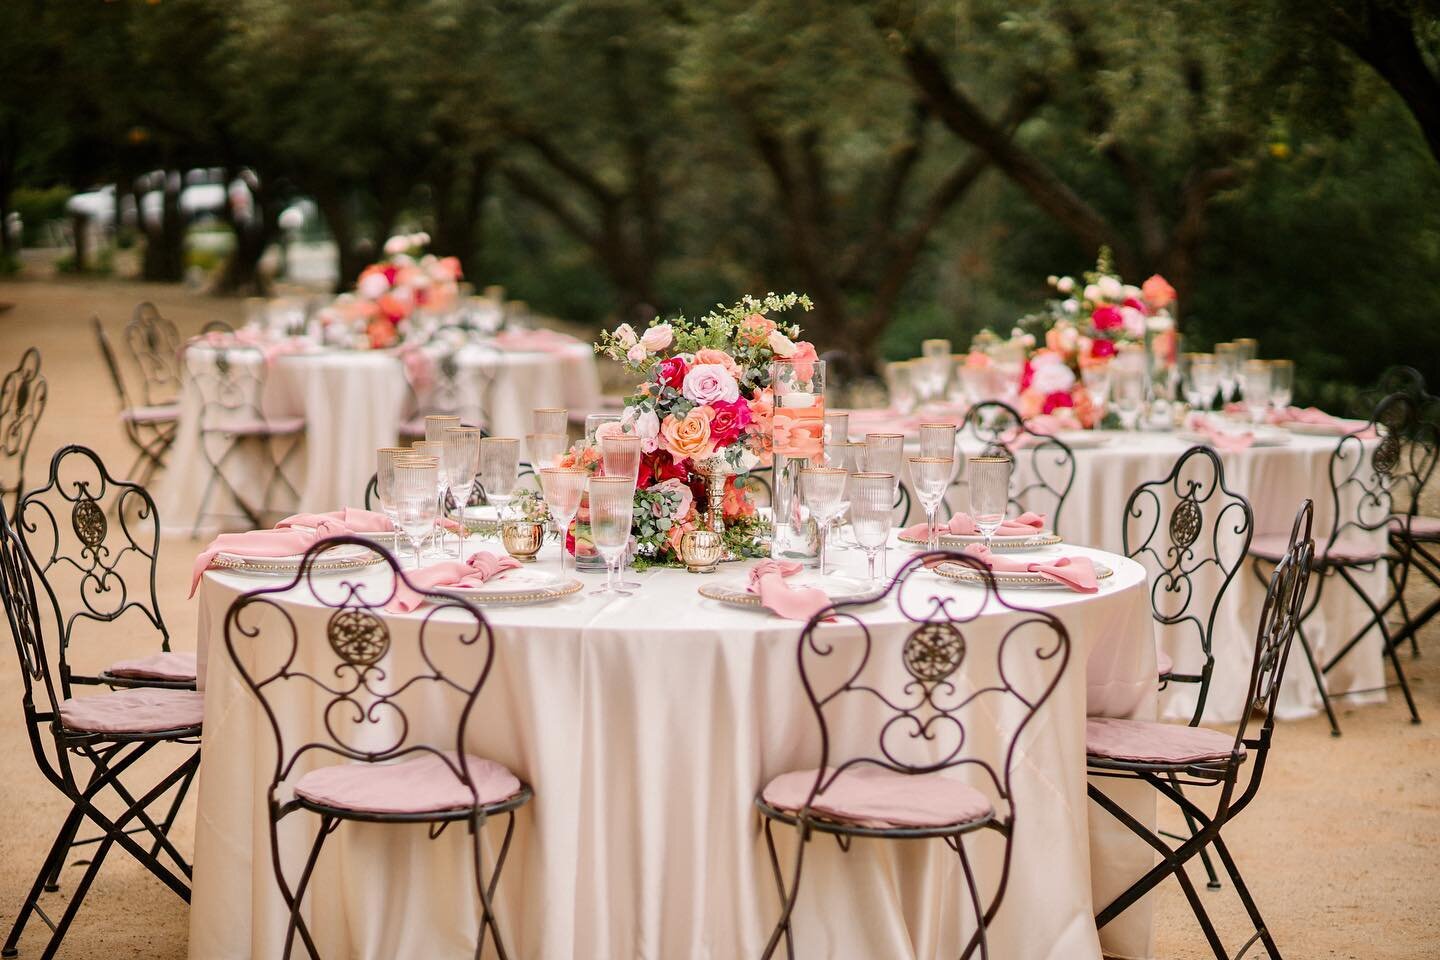 Absolutely love the @bridgertonnetflix 🫖🌸 vibes in this Garden Party Decor!

📋: #thevermilioncompany
📸: @passionstudios.wedding 
💐: @nceventdesigns 
📍: @ciaatcopia 

#gardenparty #bridgertonparty #bridgerton #summerparties